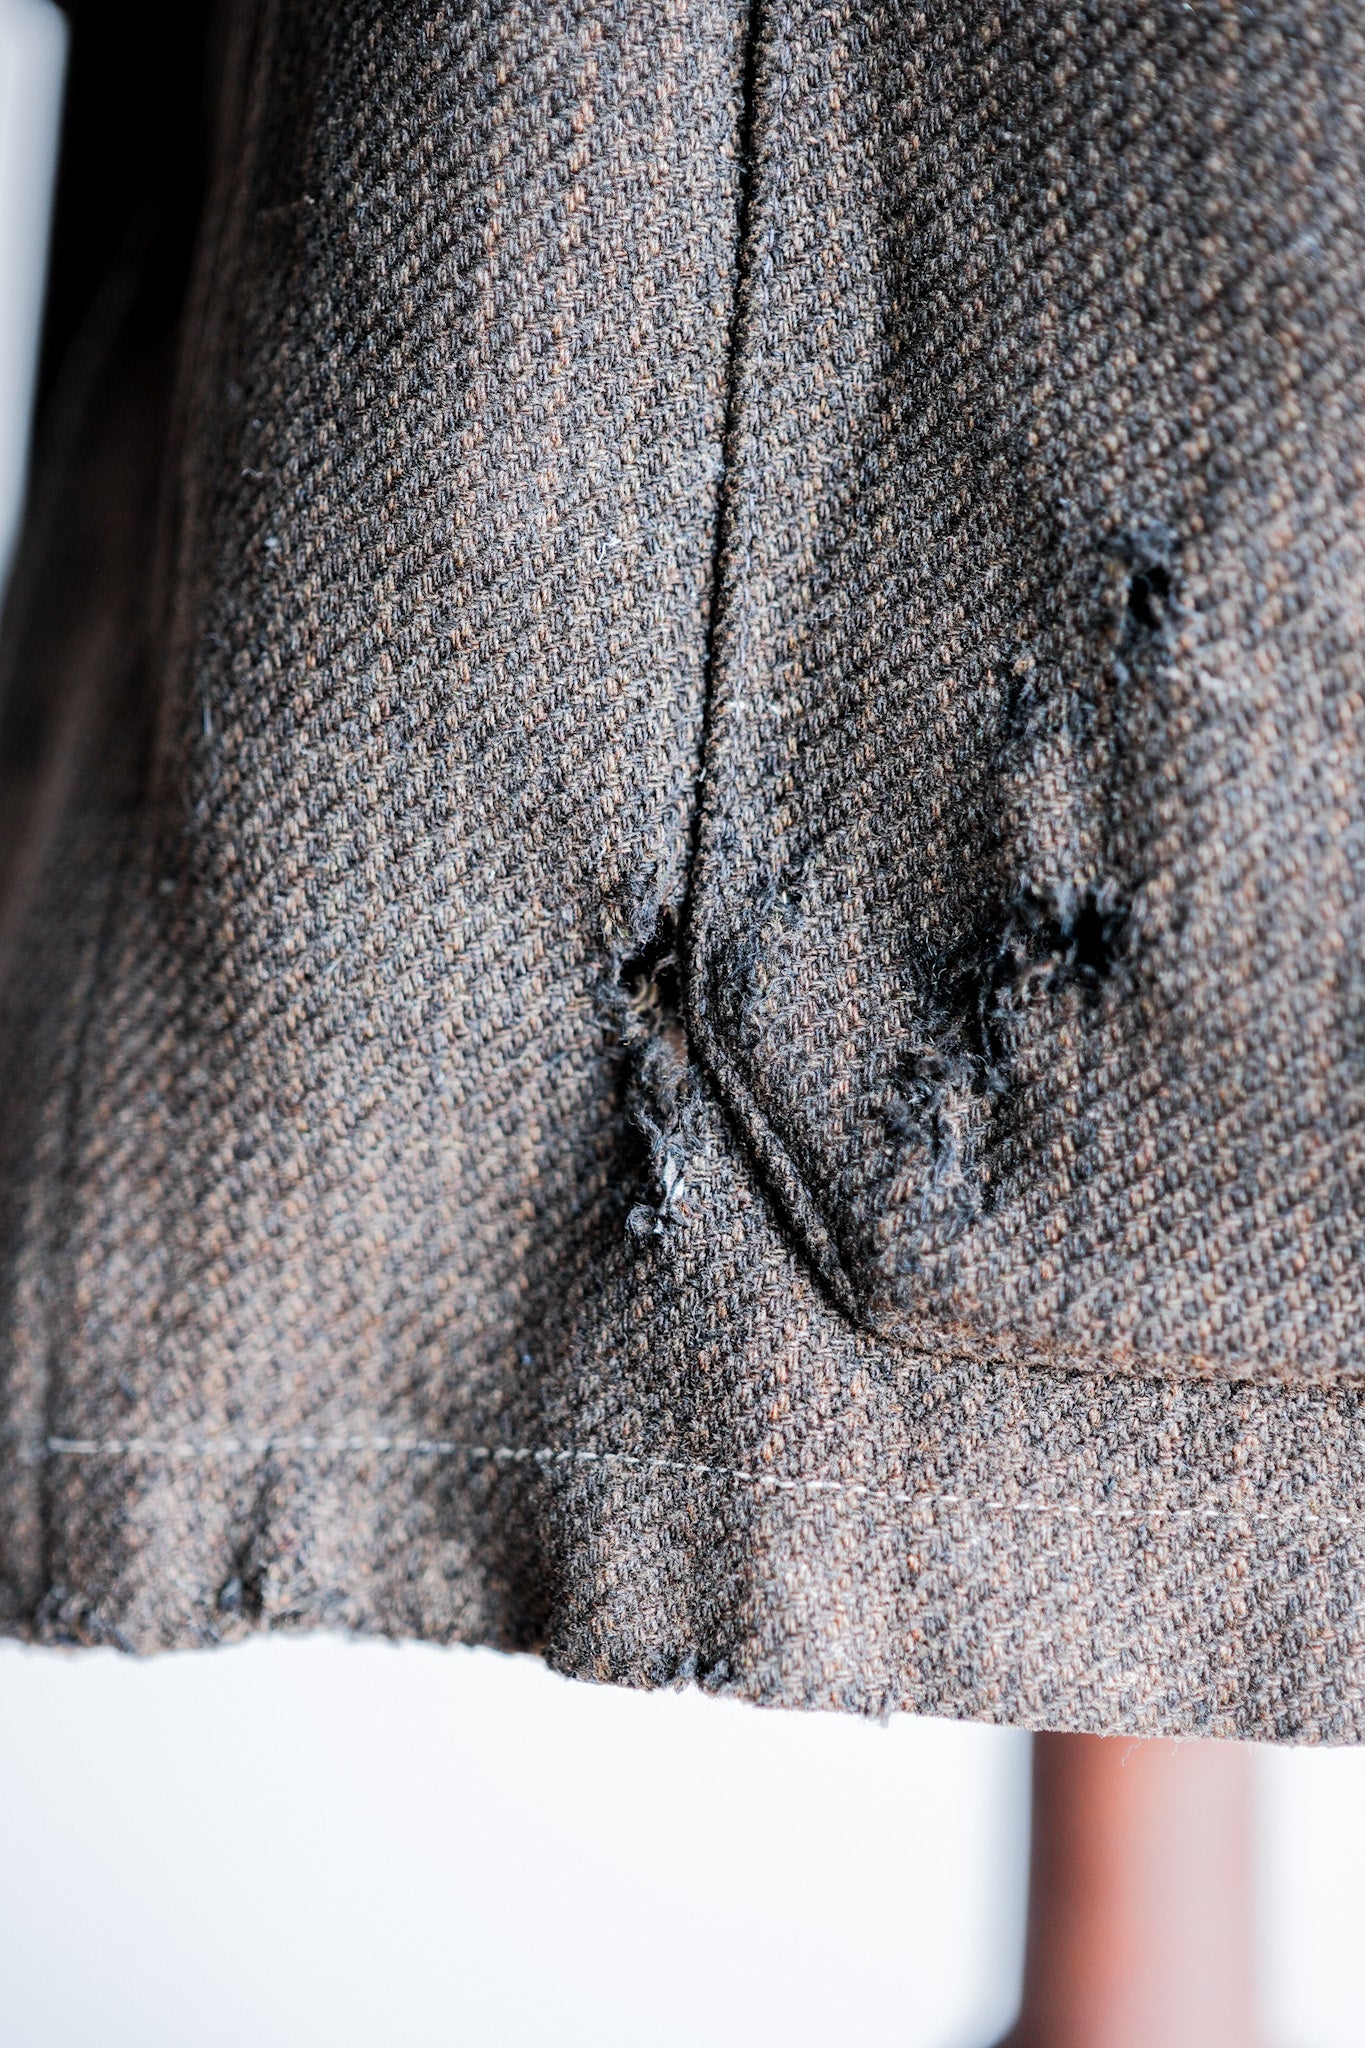 【~30's】French Vintage Brown Wool Hunting Jacket "Boro"